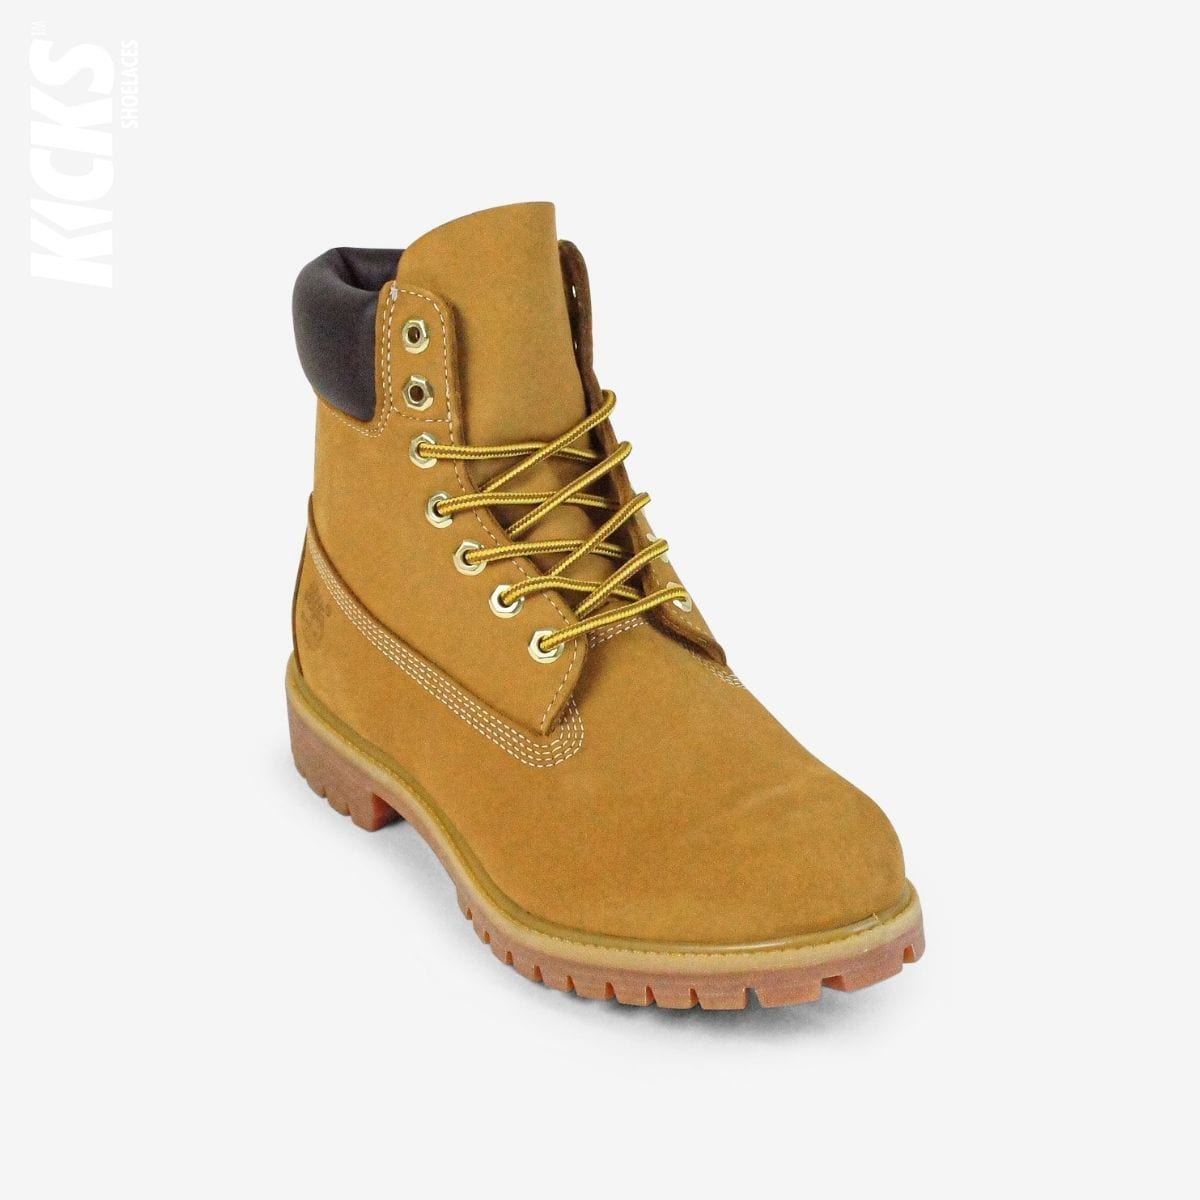 shoelaces-online-golden-yellow-and-brown-boot-laces-on-timberland-boots